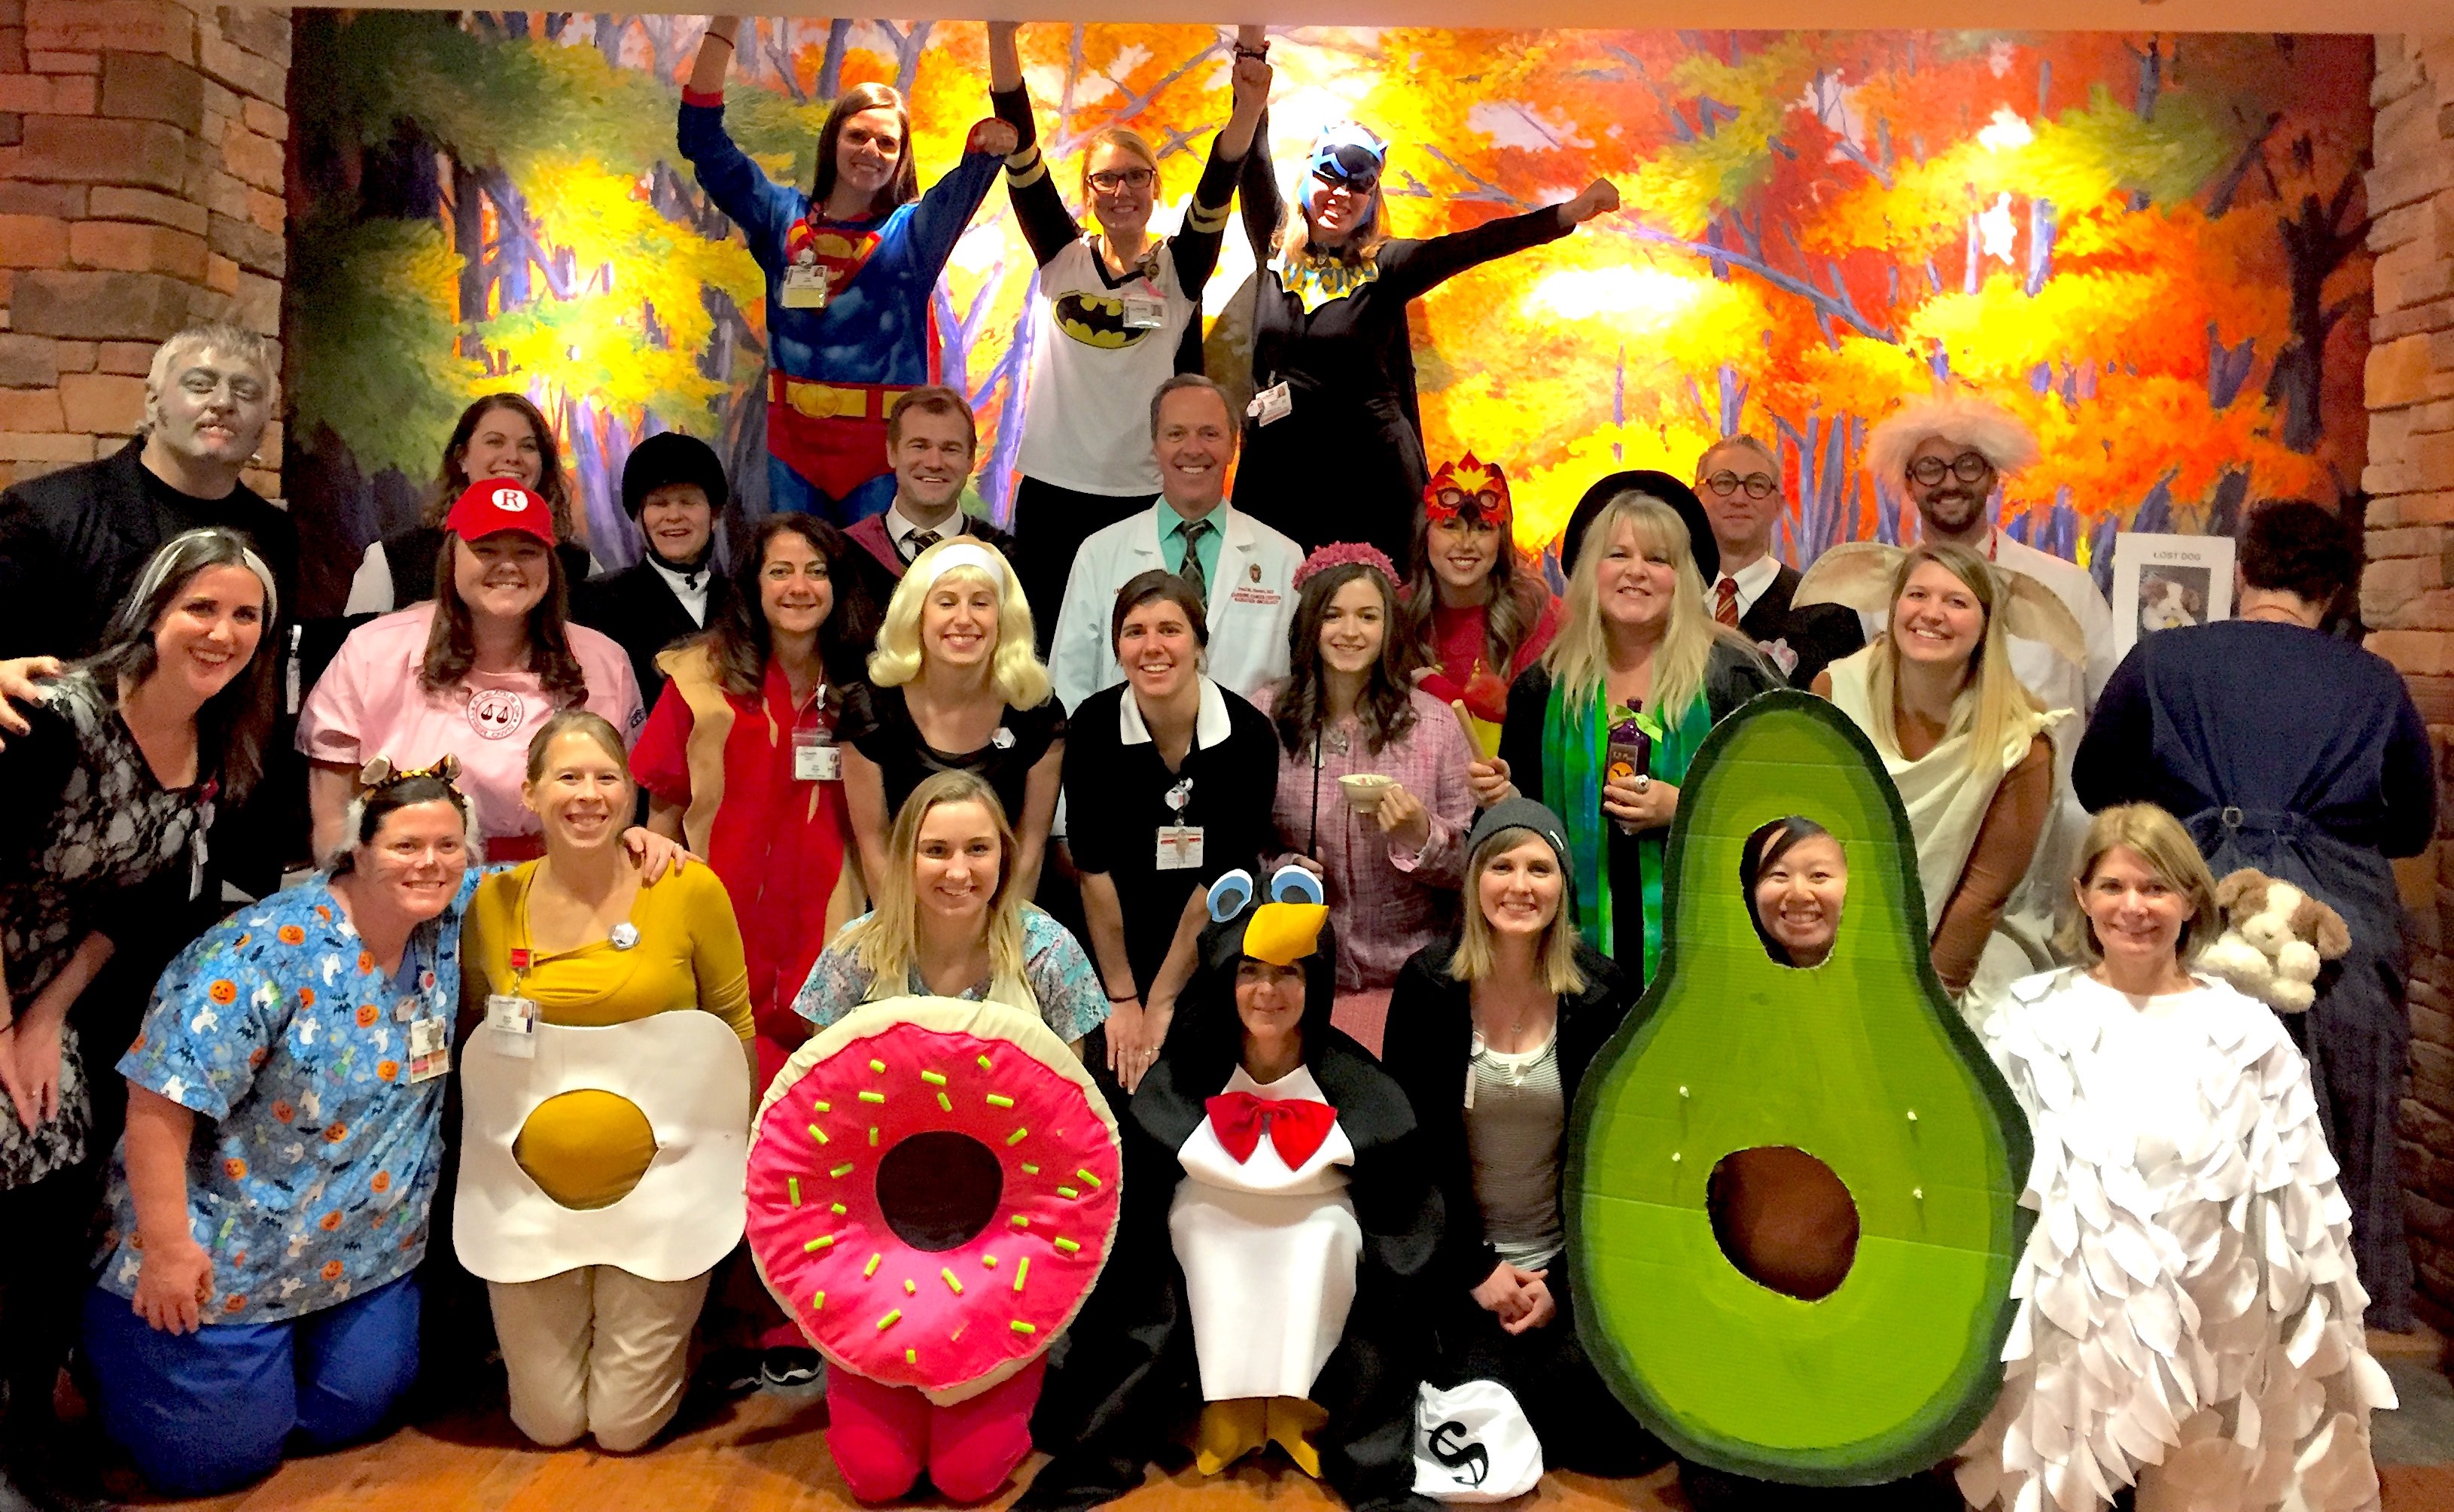 UW Radiation Oncology staff dressed for Halloween